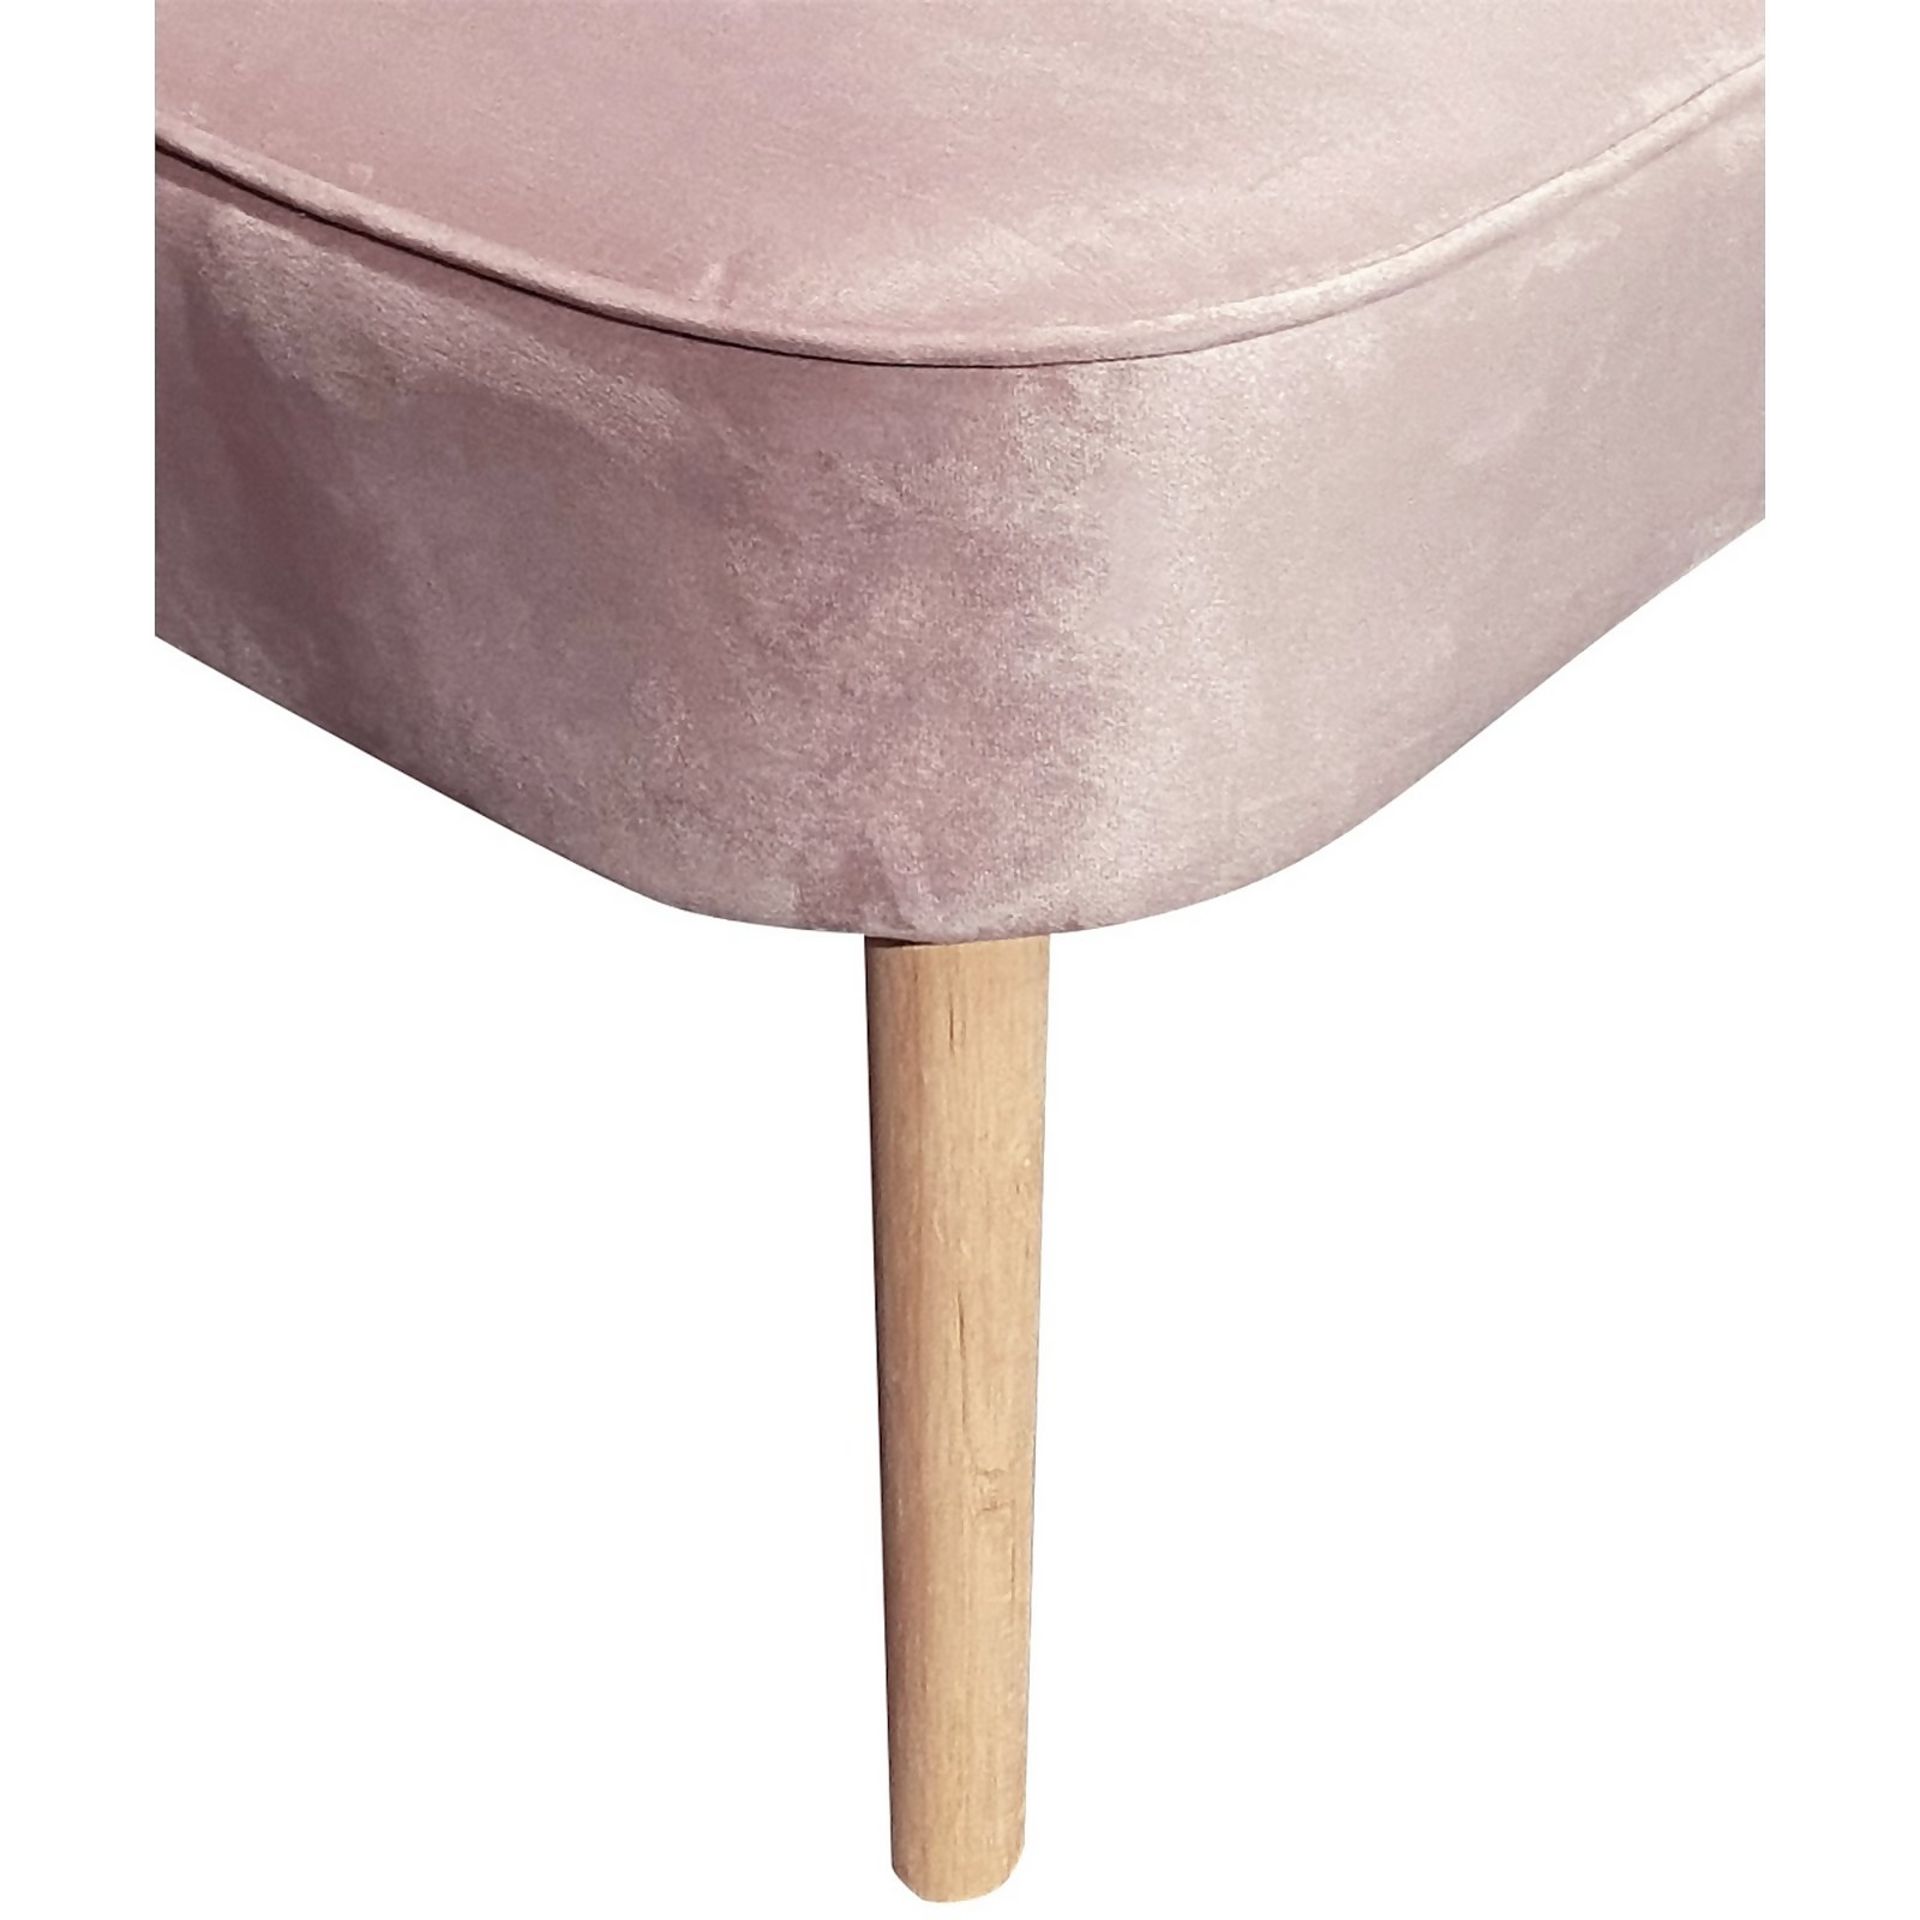 (R3P) 1 X Sophia Occasional Chair Blush. Velvet Fabric Cover With Metal Legs. (H77xW64xD71cm) - Image 2 of 6